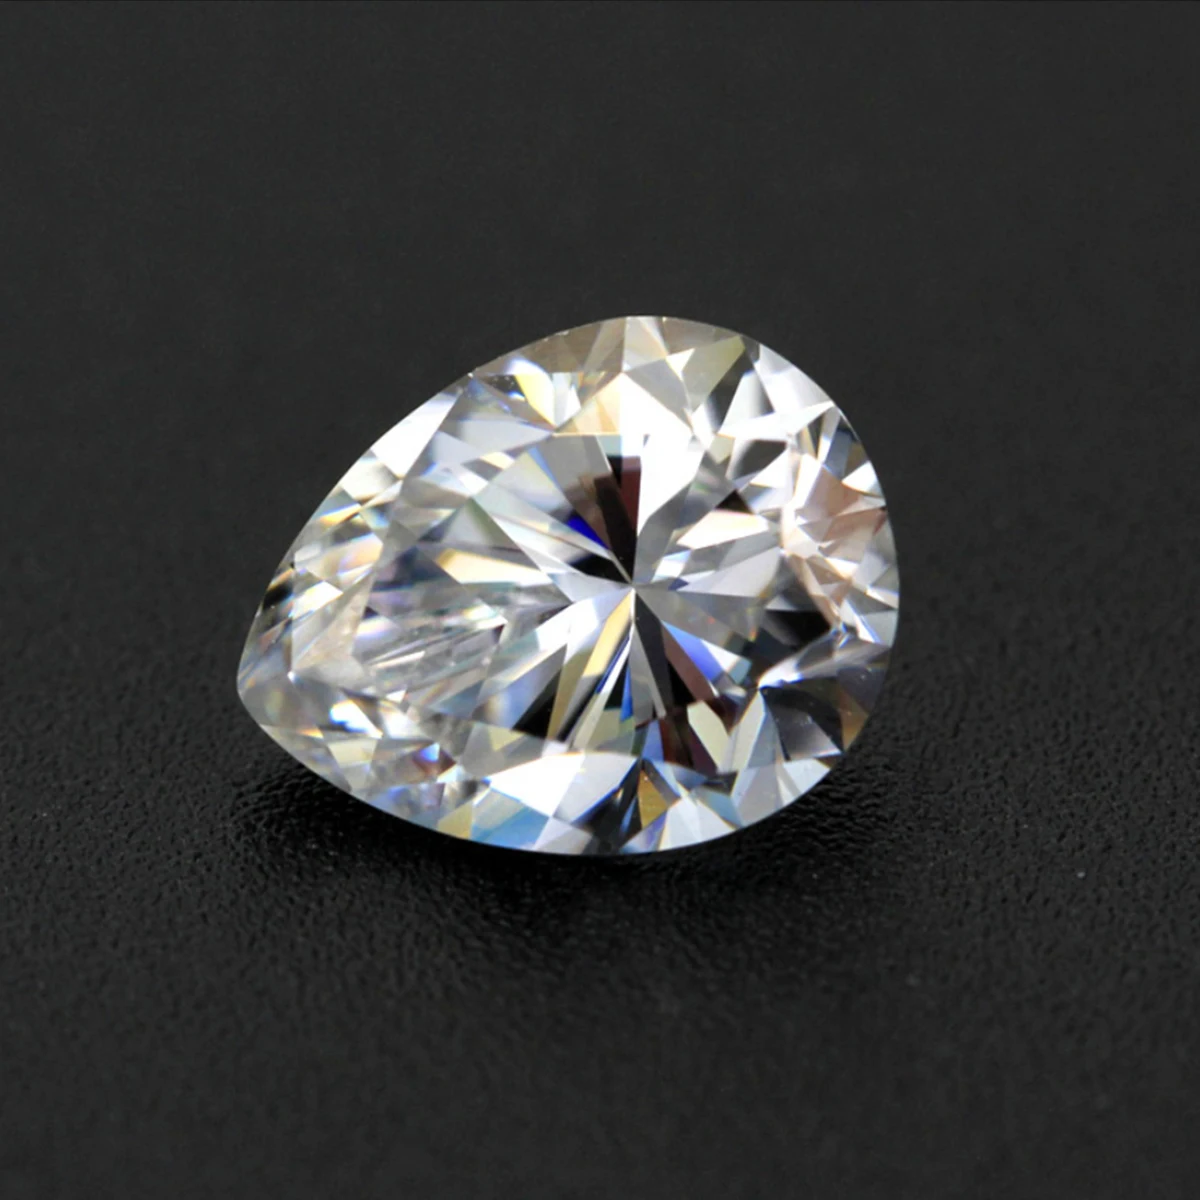 Szjinao Loose Gemstones Moissanite Stone 0.35ct To 13ct D Color VVS1 Pear Shaped Diamond For Jewelry Pass Moissanite Tester Gems